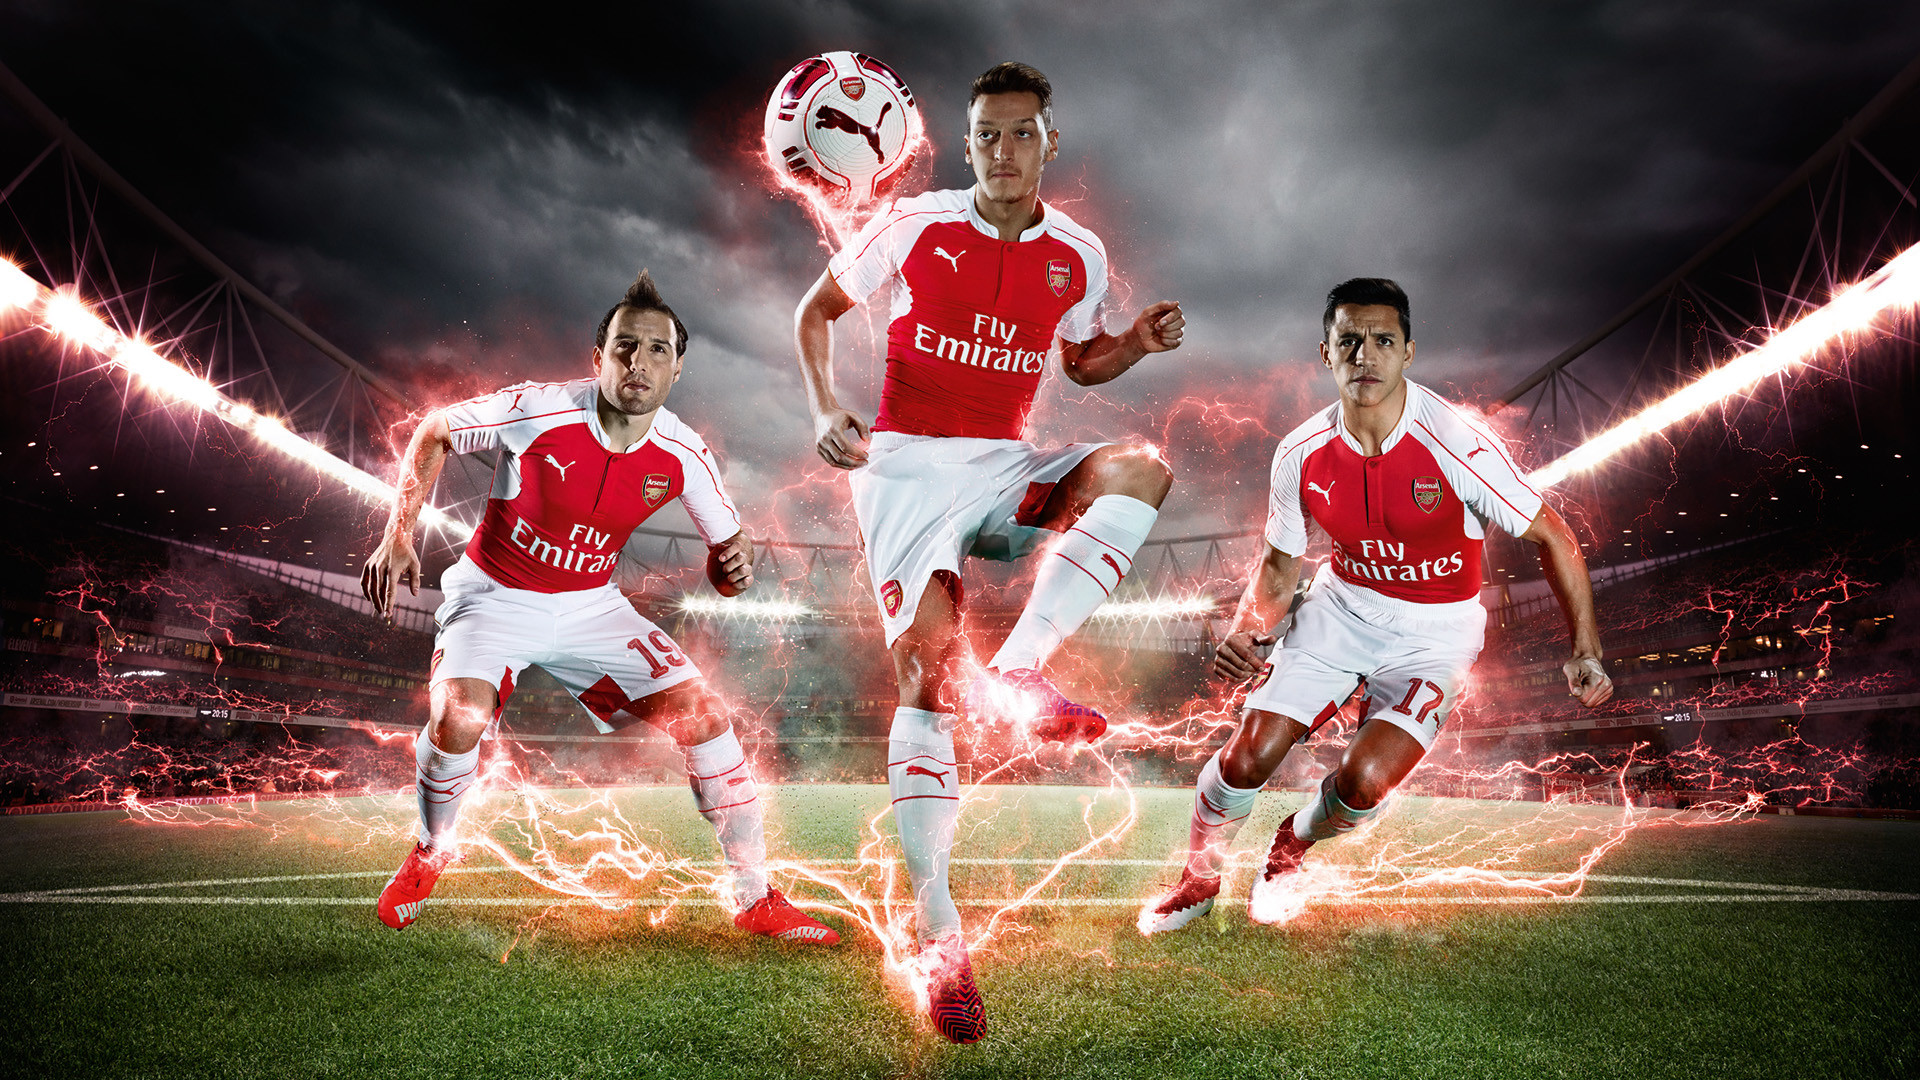 1920x1080 Search Results for “arsenal wallpaper hd – Adorable Wallpapers